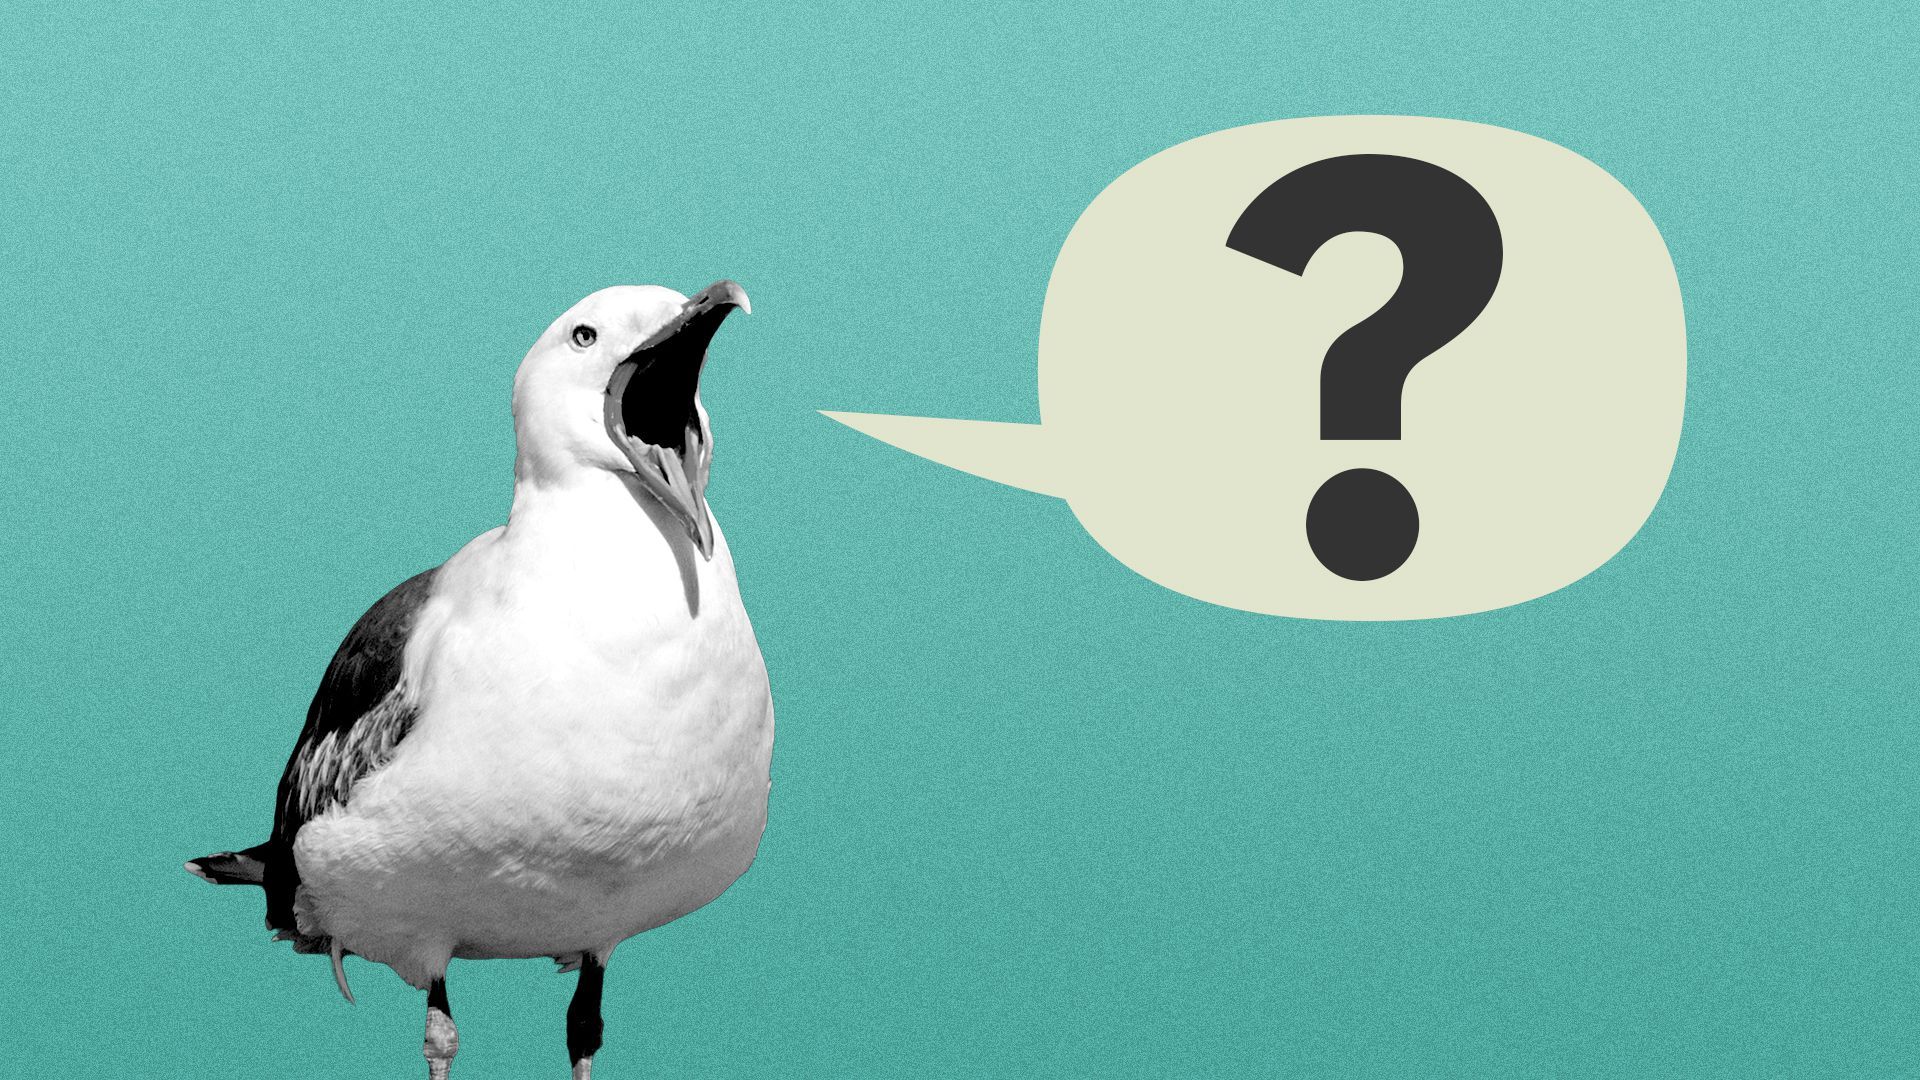 Illustration of a sea gull with a word balloon with a question mark in it coming out of its mouth.